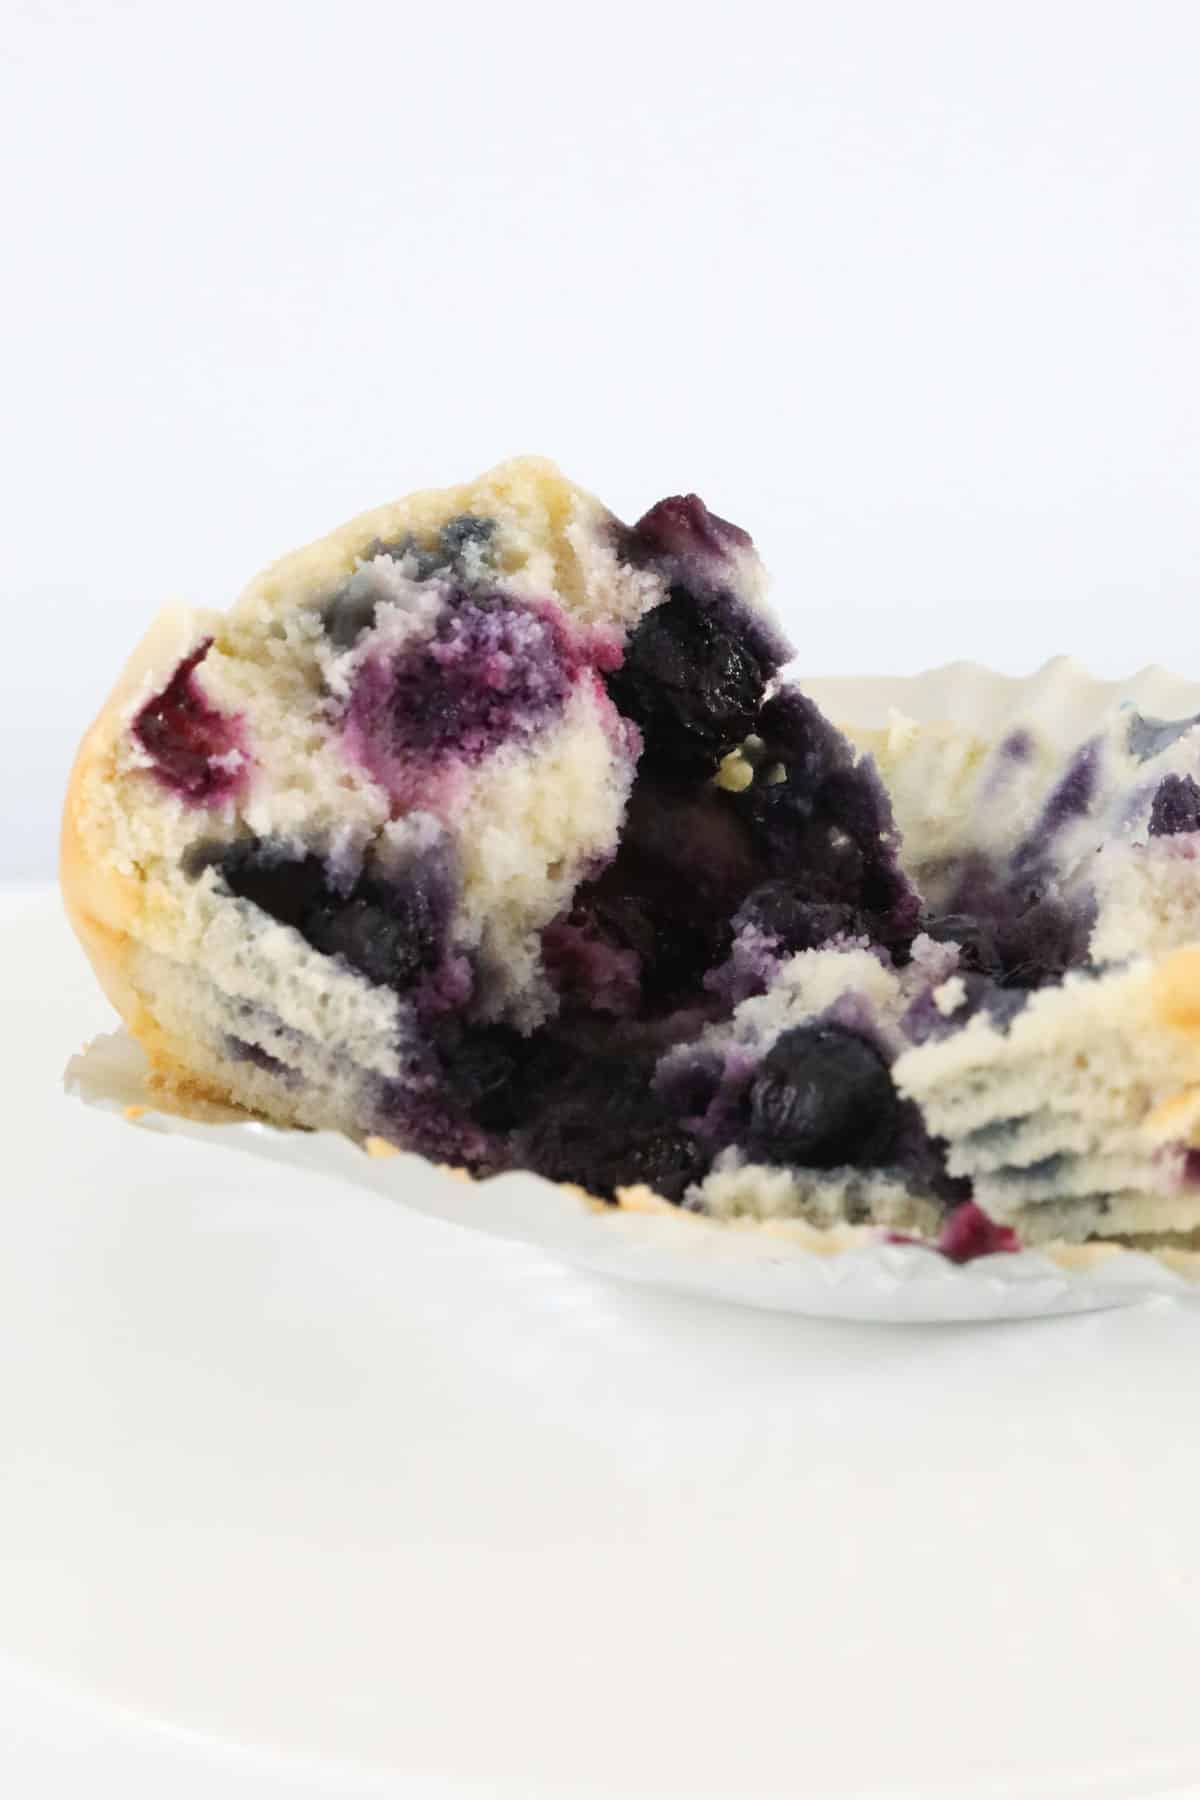 Half a muffin filled with blueberries.